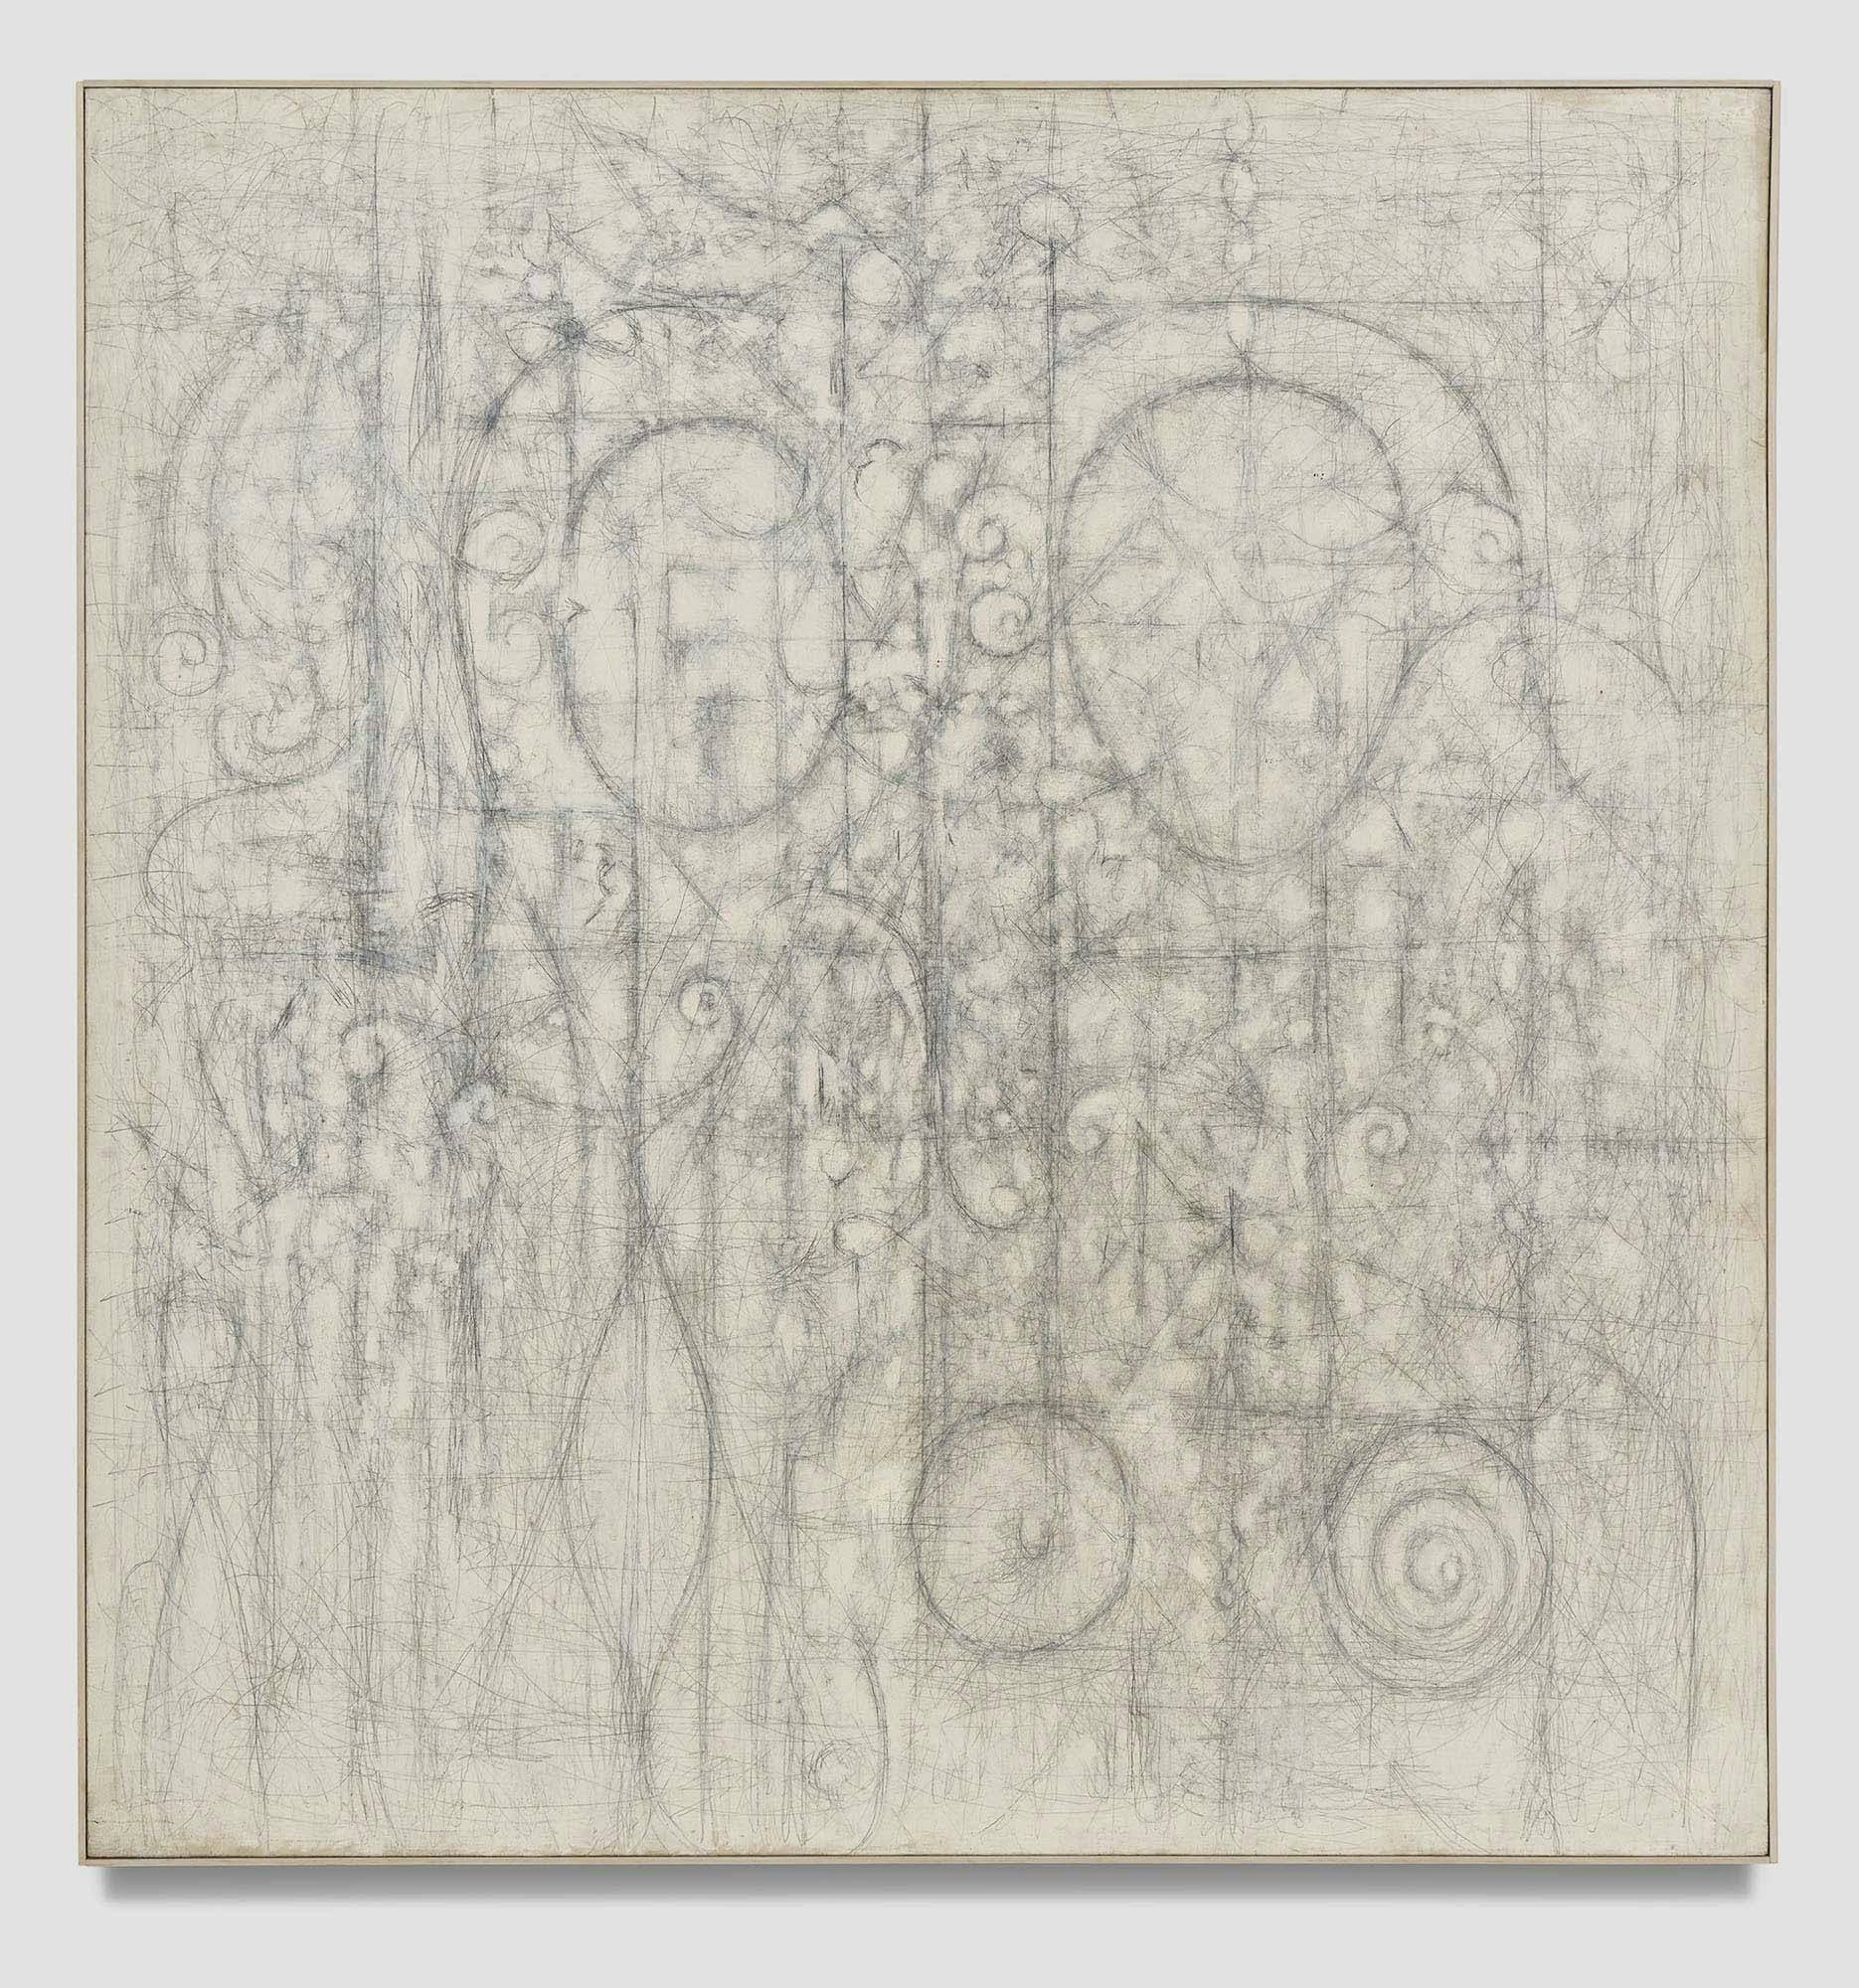 Quiet Lovers
1950–51
Oil and graphite on linen
53 1/4 x 50 1/4 in. (135.3 x 127.6 cm)
 – The Richard Pousette-Dart Foundation